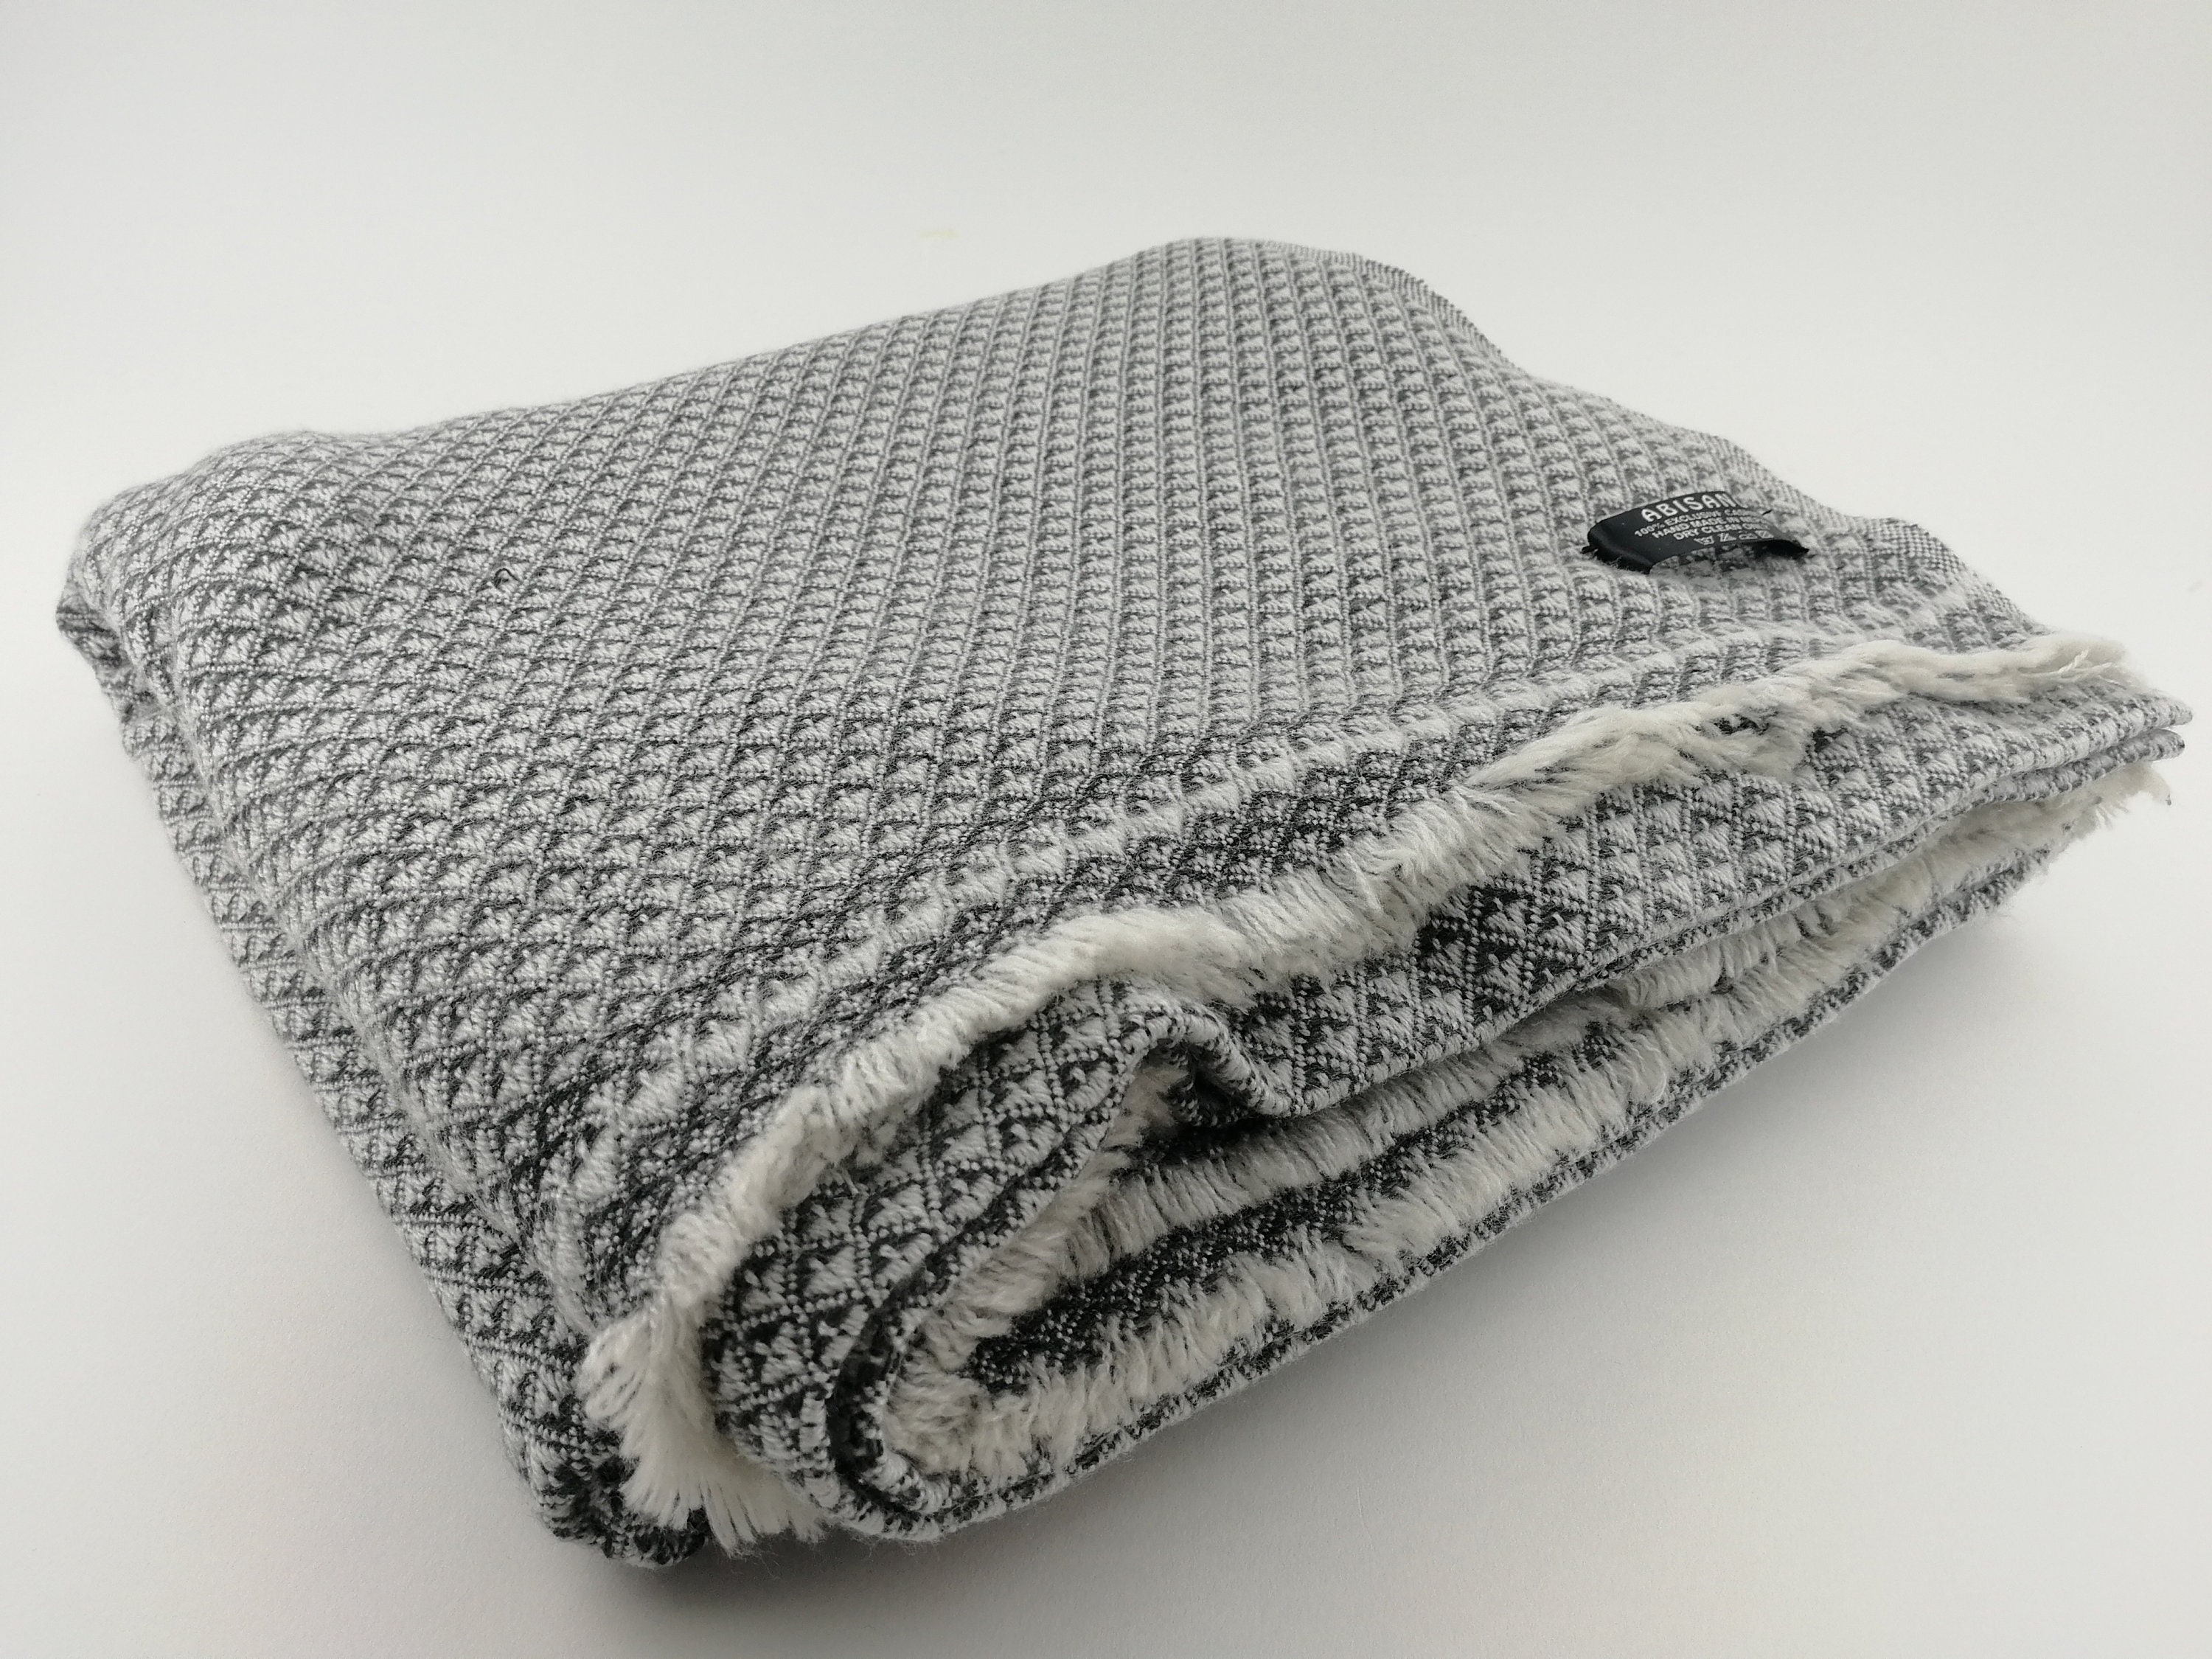 NEW 125x250cm hand woven from Nepal Luxury Cashmere Blanket 100% cashmere wool